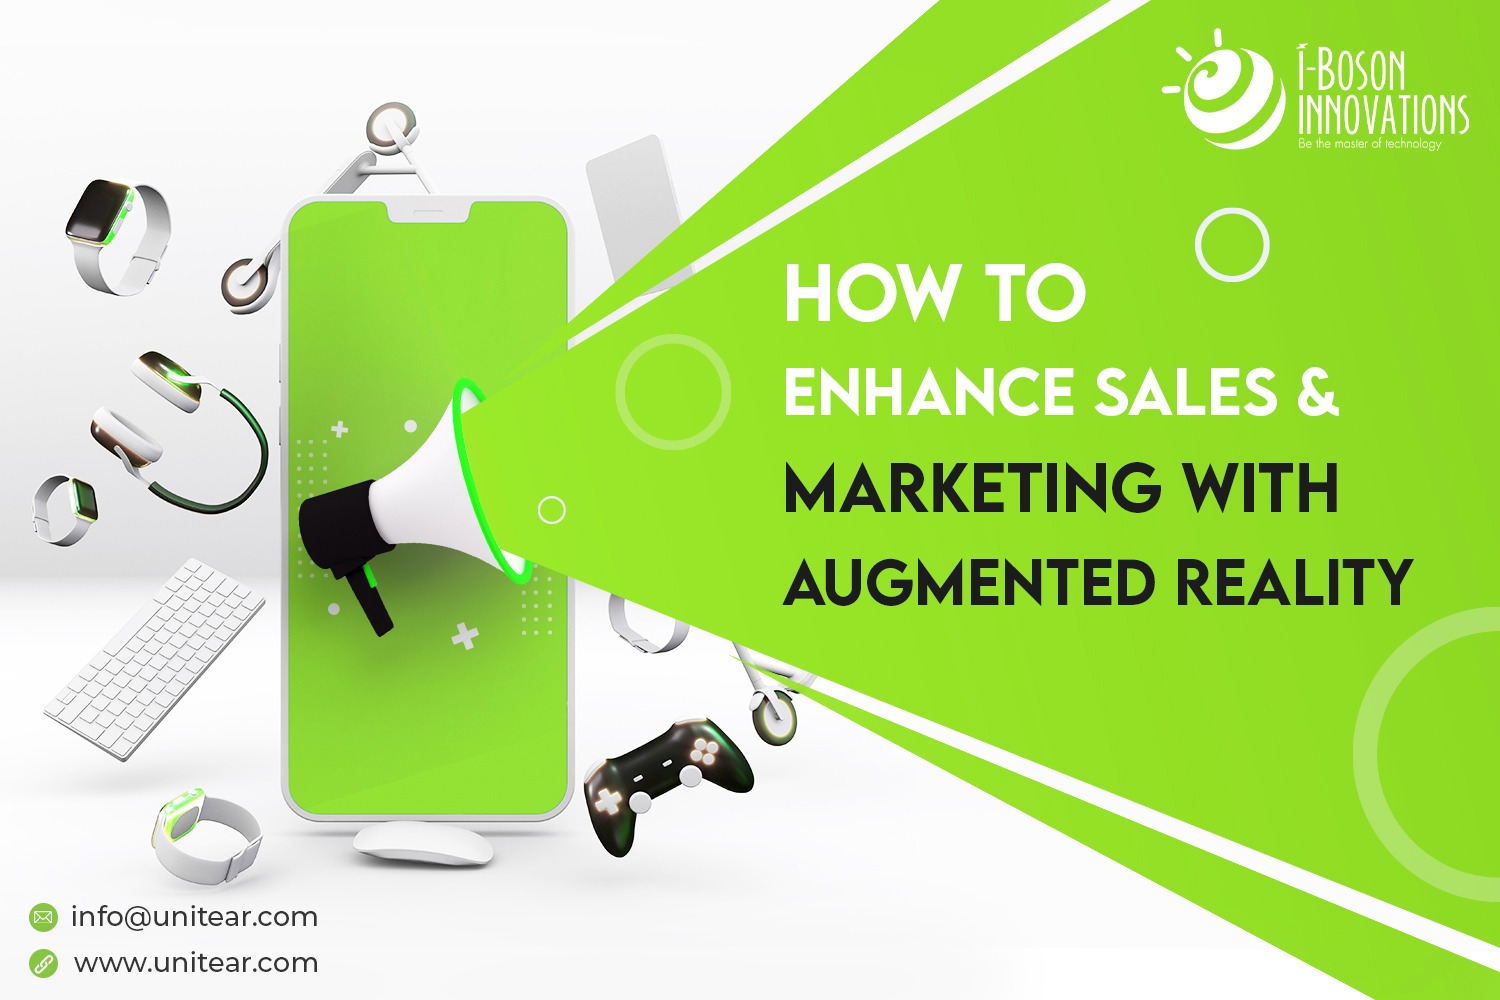 How can AR enhance sales and marketing
                       